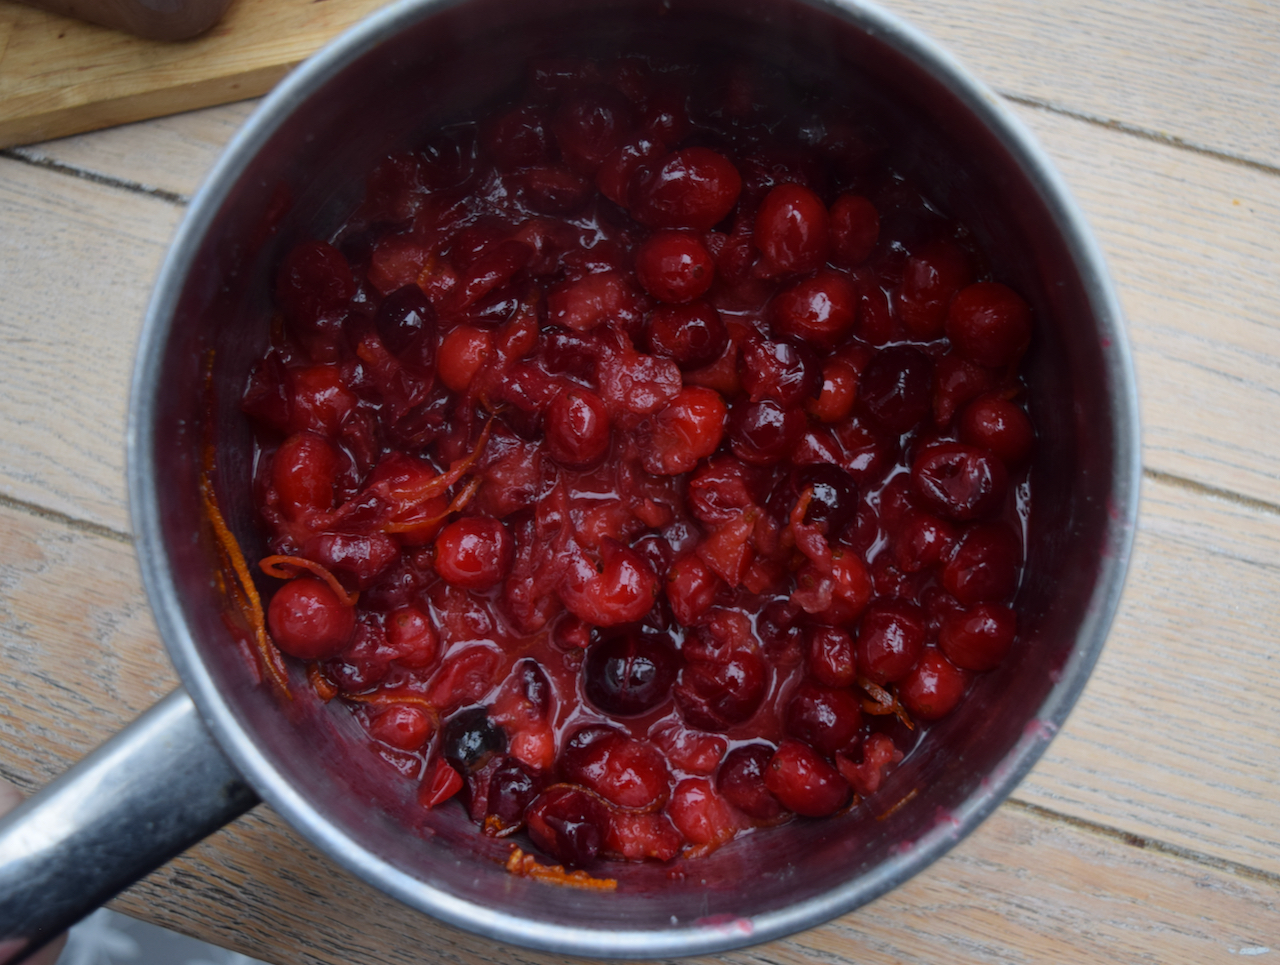 Cranberry Orange Pudding Cake recipe from Lucy Loves Food Blog